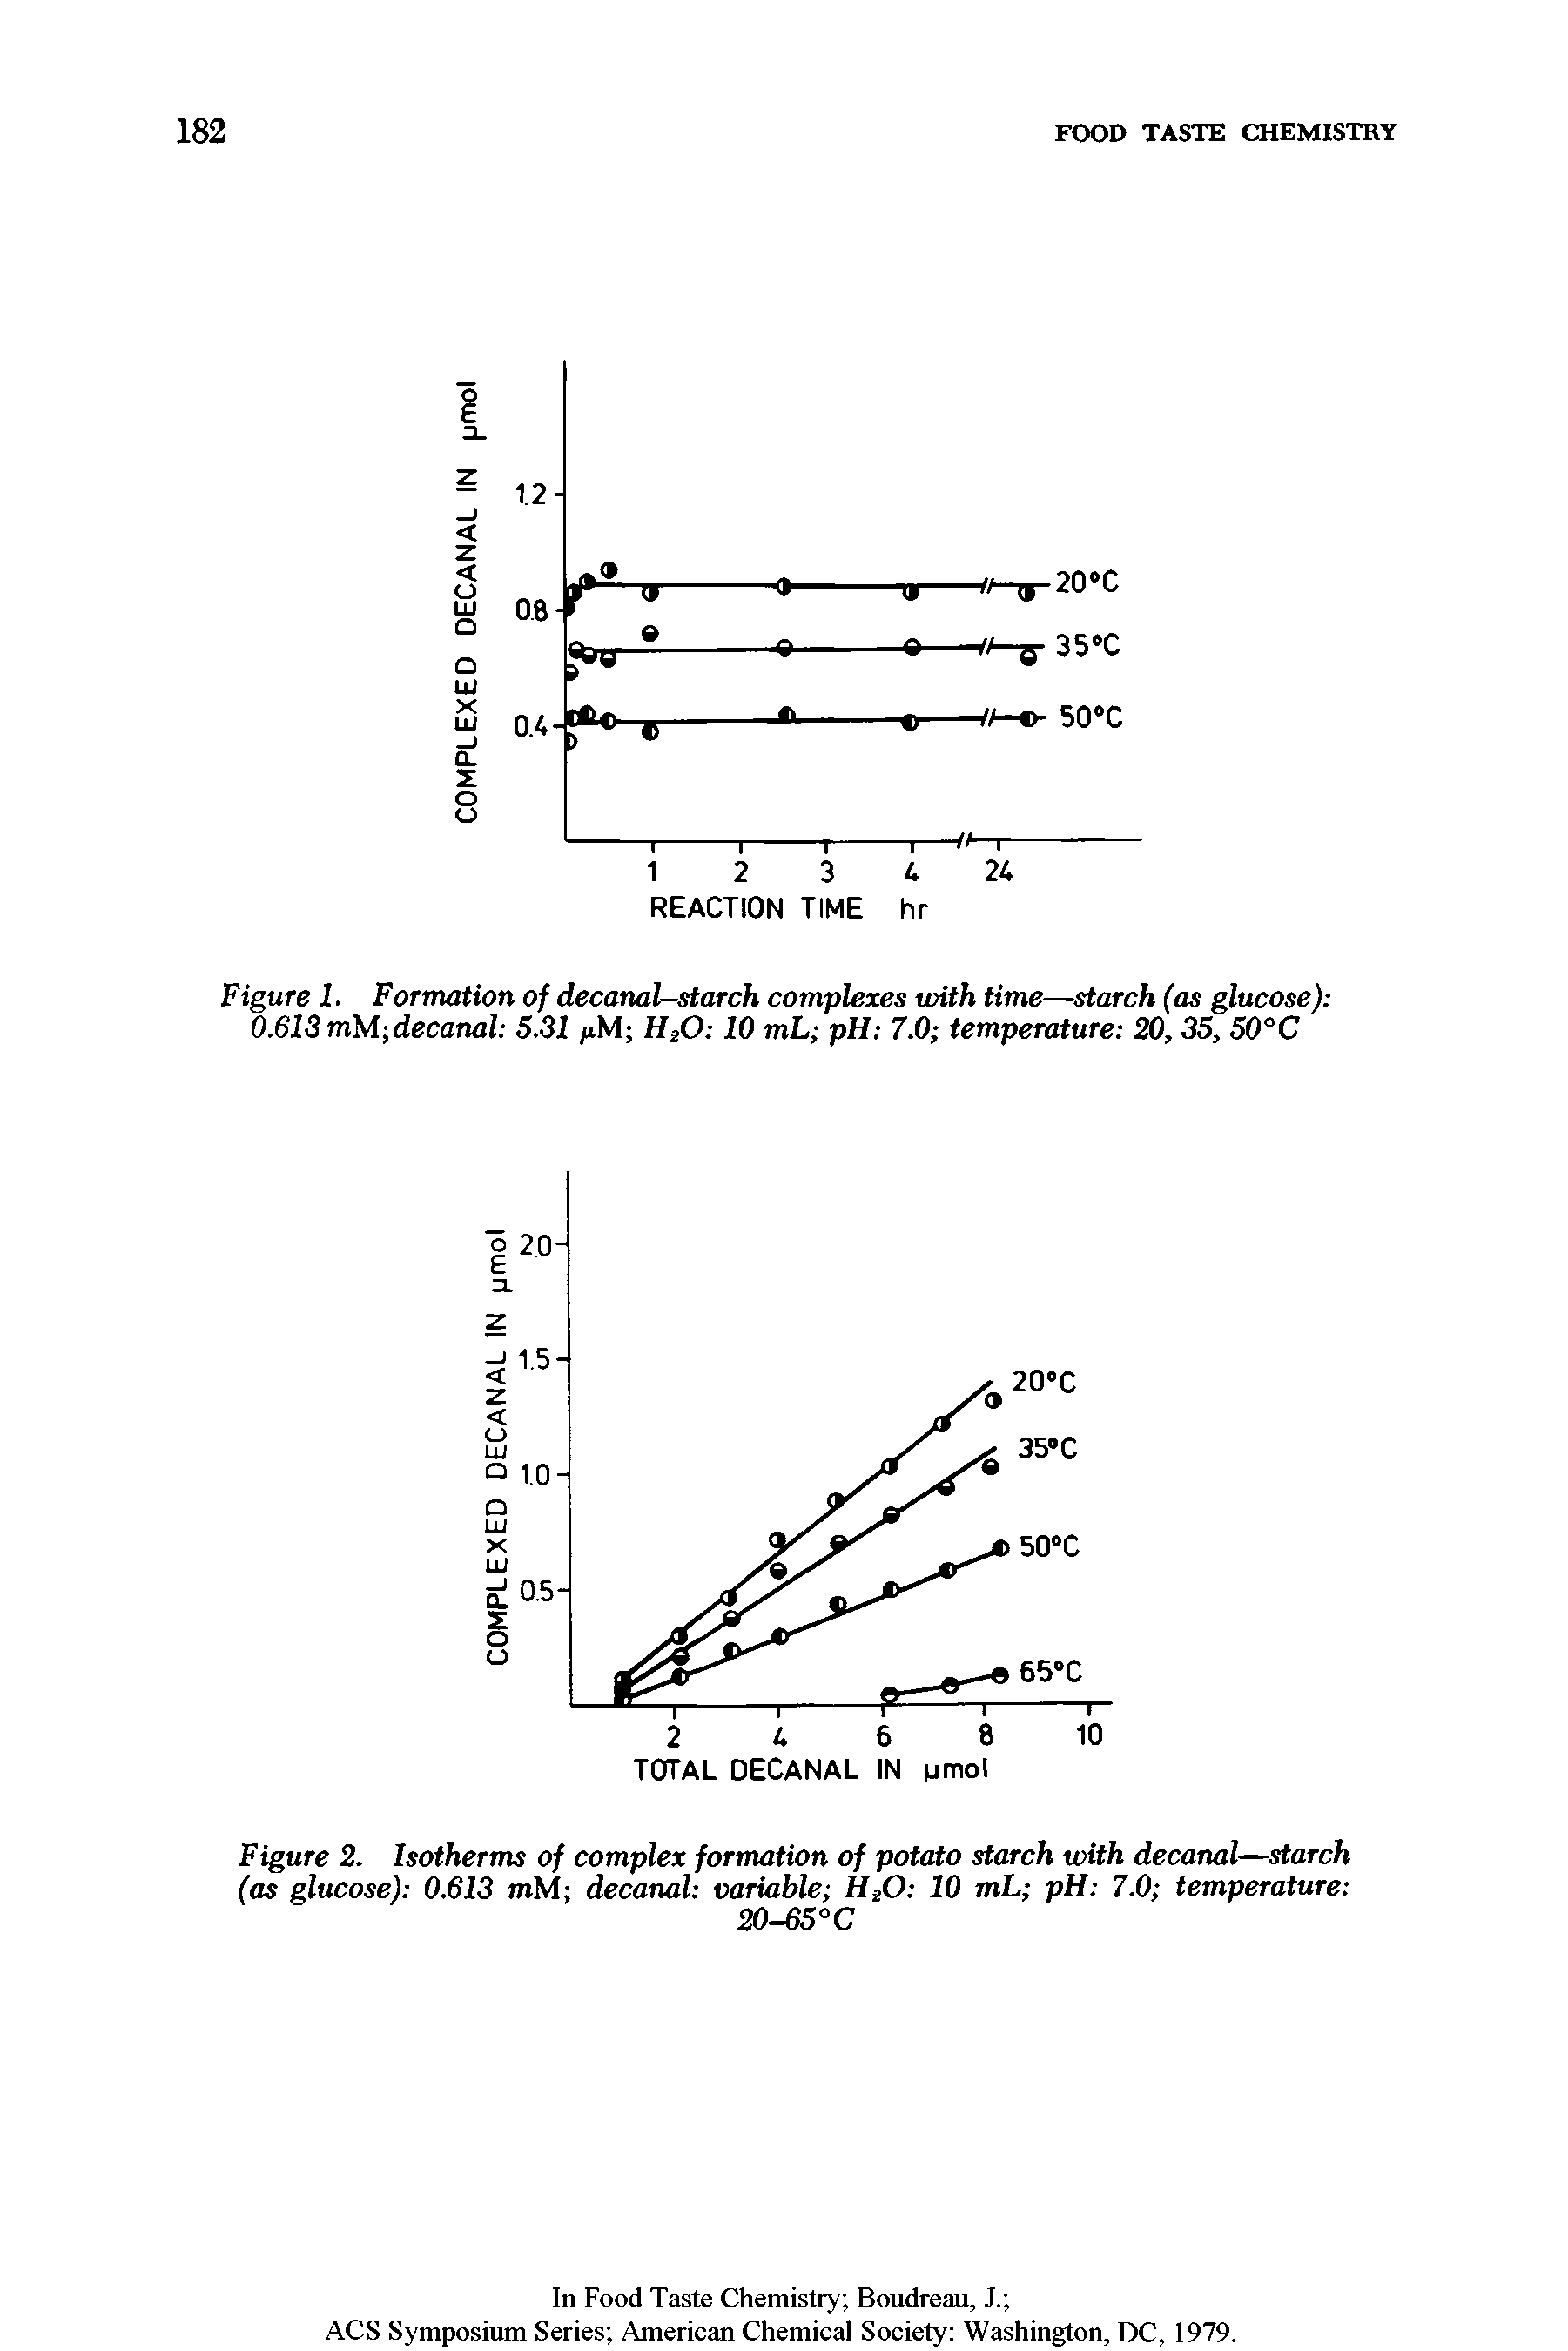 Figure 2. Isotherms of complex formation of potato starch with decanal—starch (as glucose) 0.613 mM decanal variable H20 10 mL pH 7.0 temperature ...